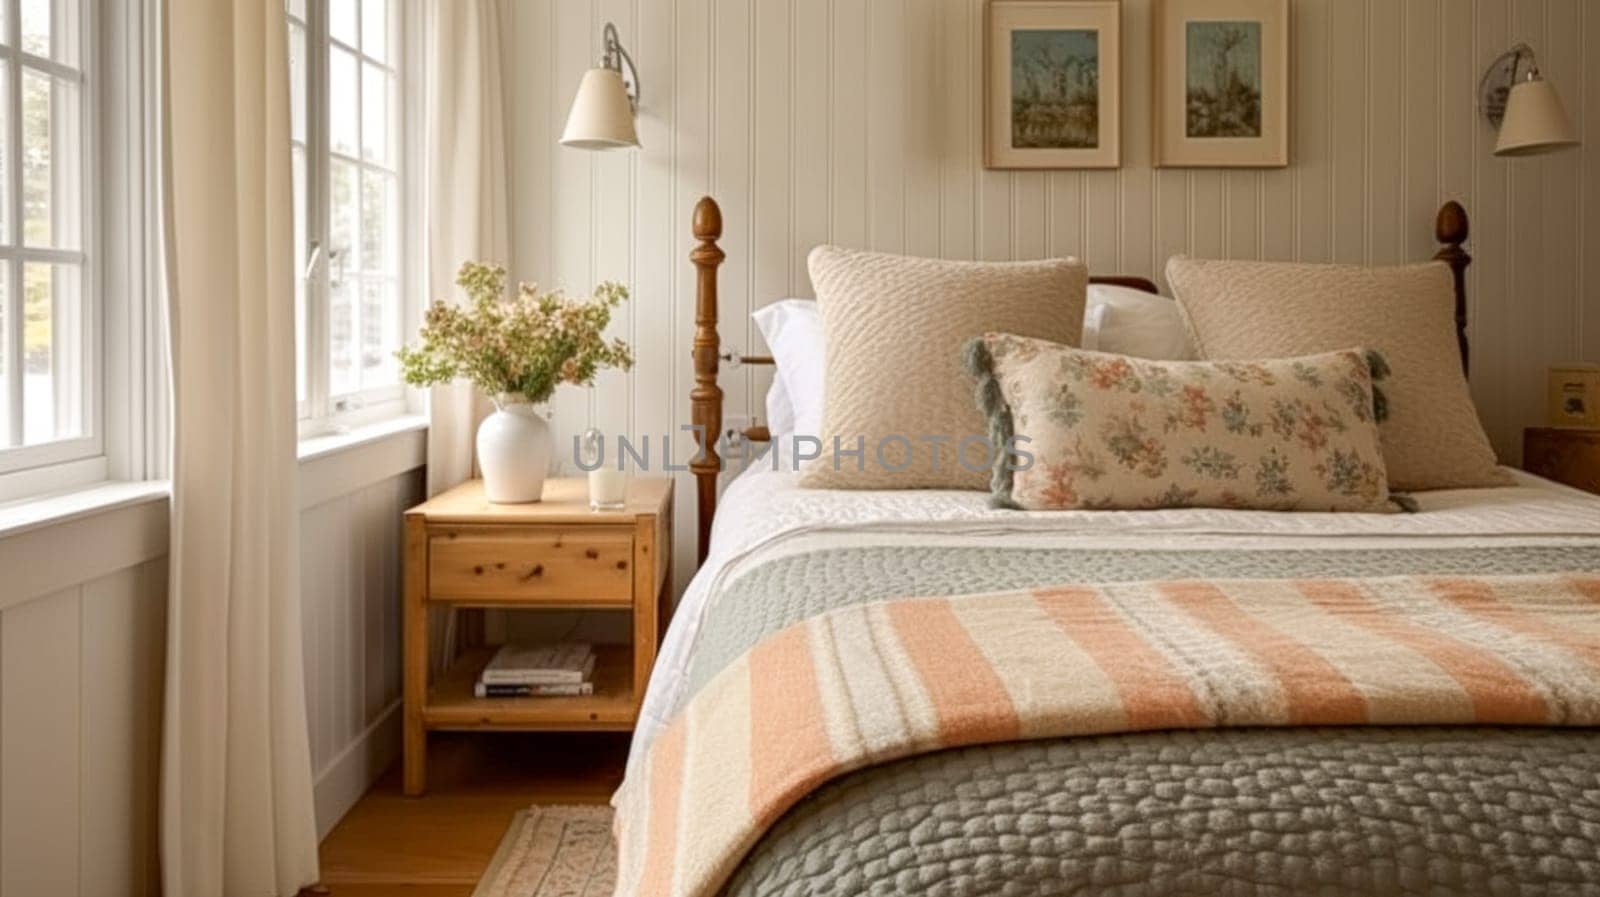 Farmhouse bedroom decor, interior design and home decor, bed with country bedding and furniture, English countryside house, holiday rental and cottage style inspiration